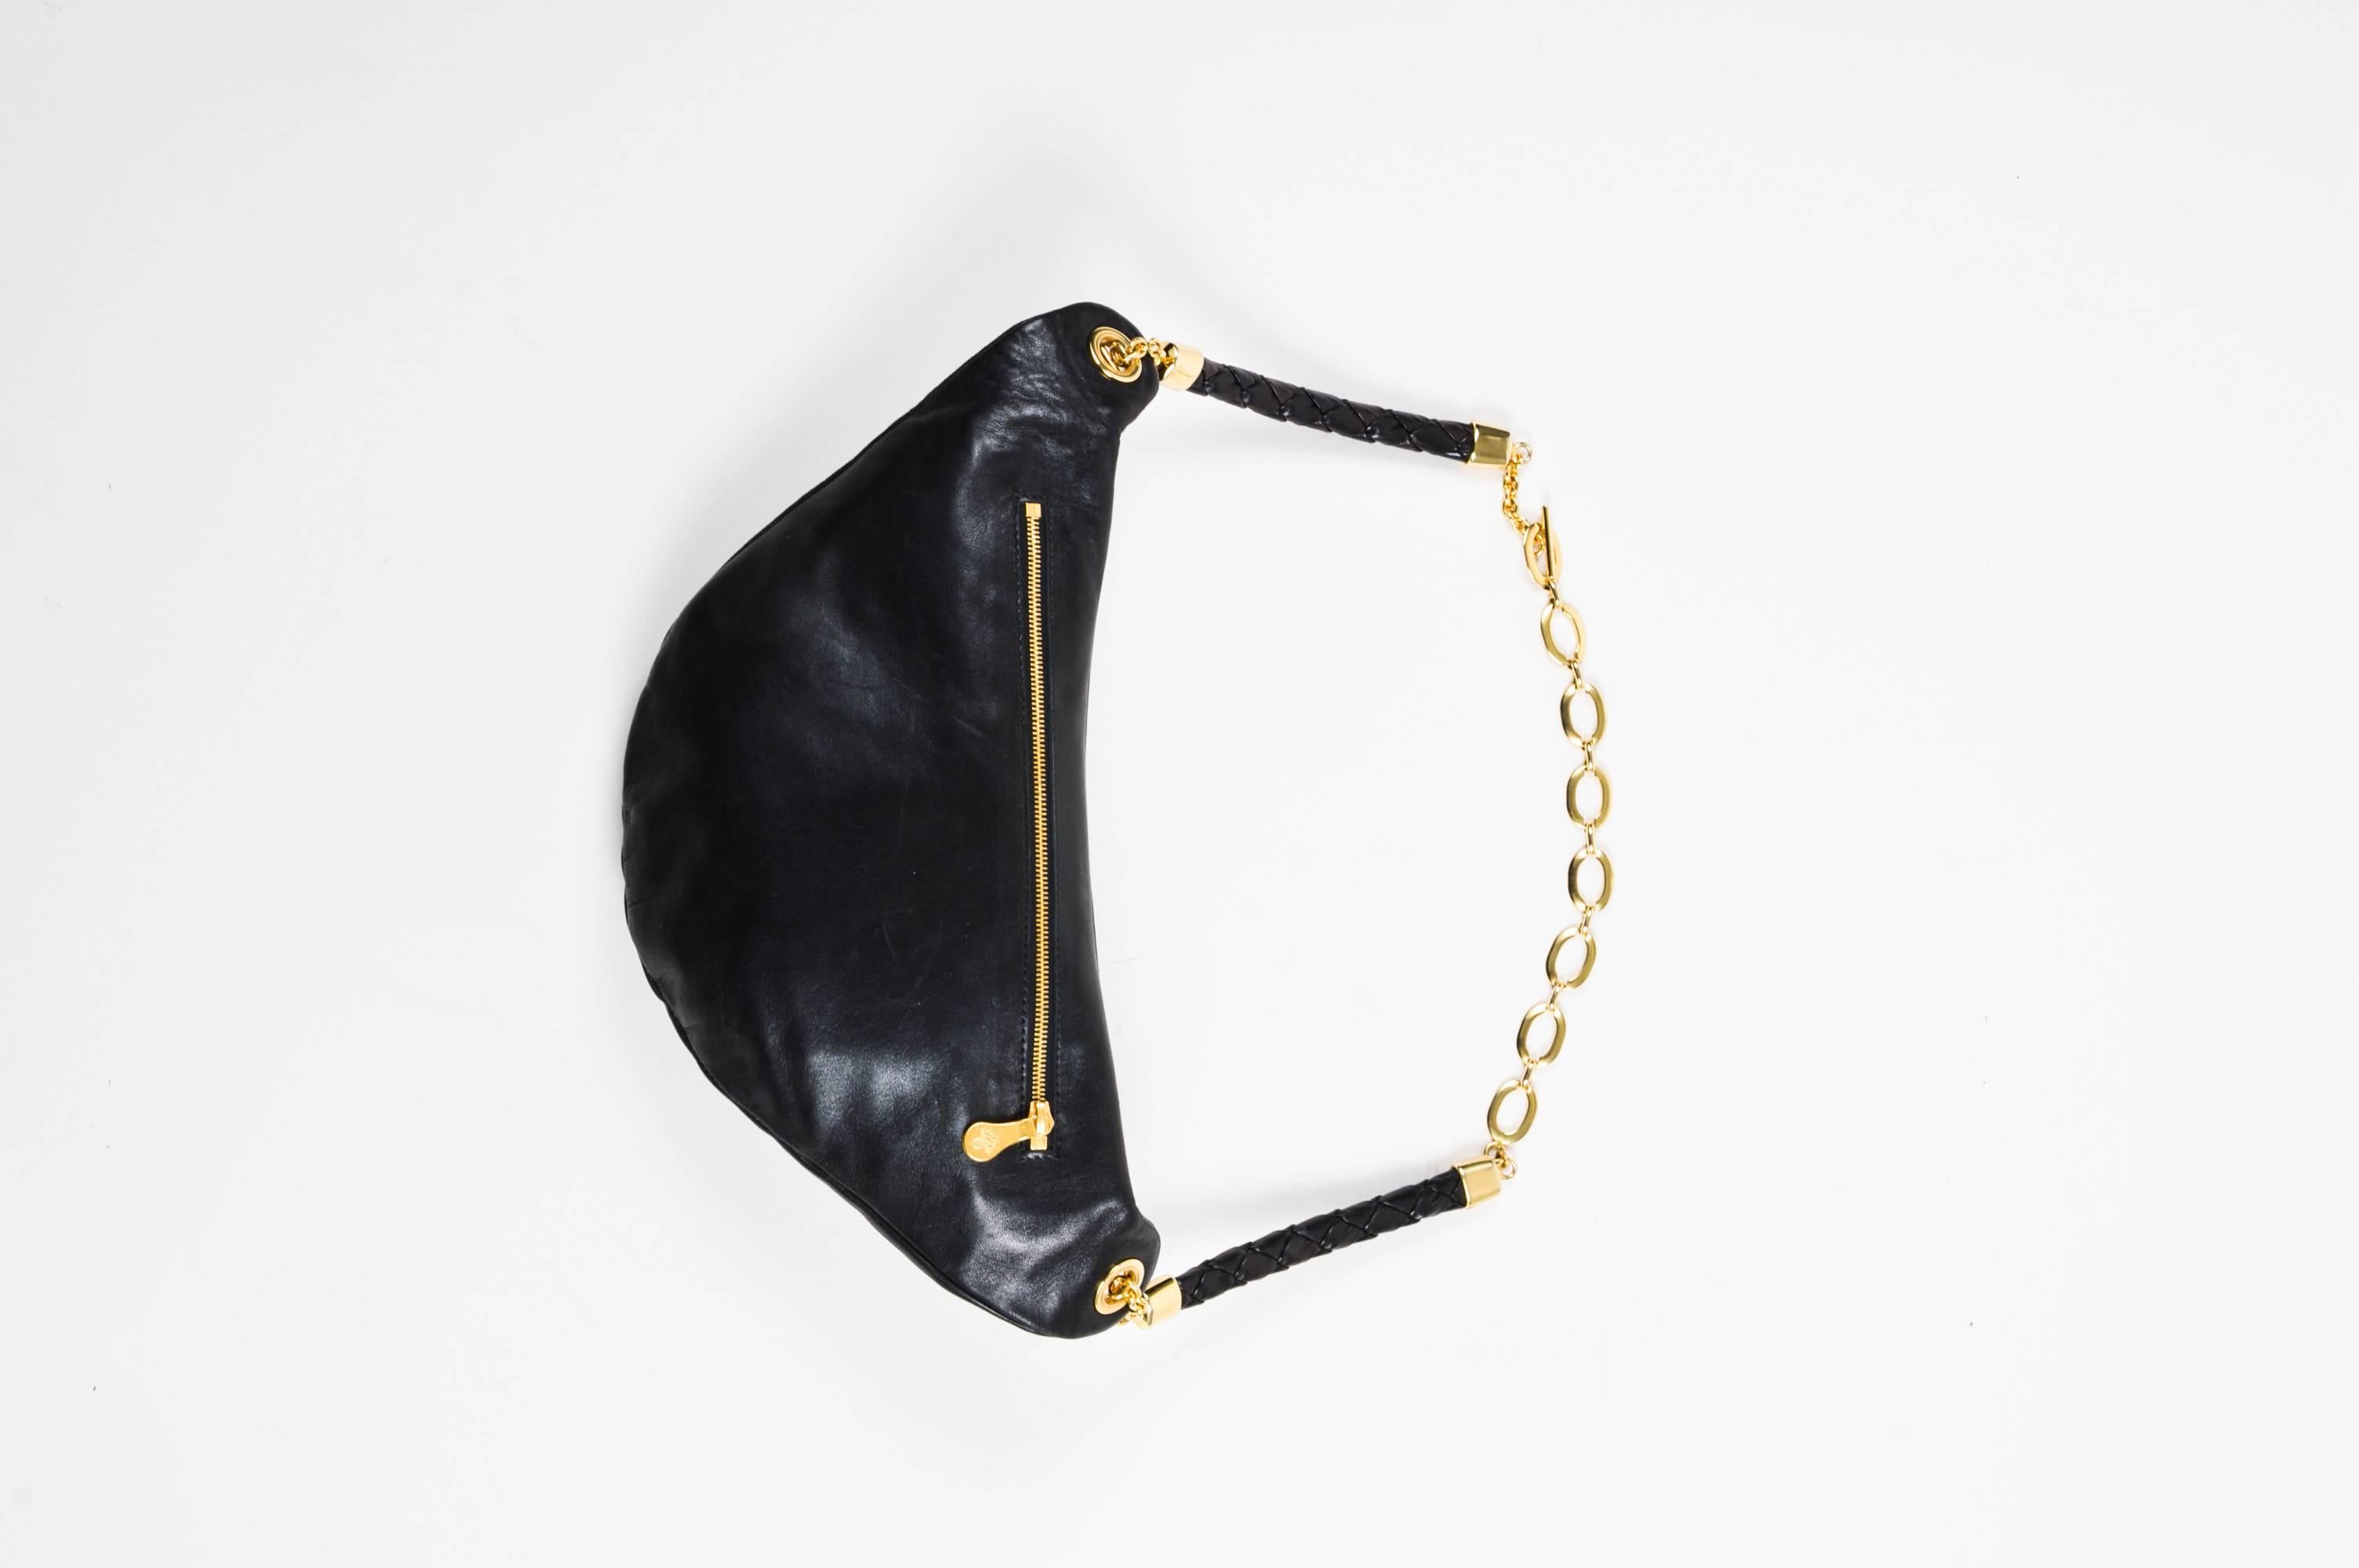 A fashionable fanny pack constructed of supple black leather and accented with shiny gold-tone hardware. Crescent shaped bag features embroidered detailing, a front zip compartment, and a hidden back zip pocket. Chain link and braided leather strap.